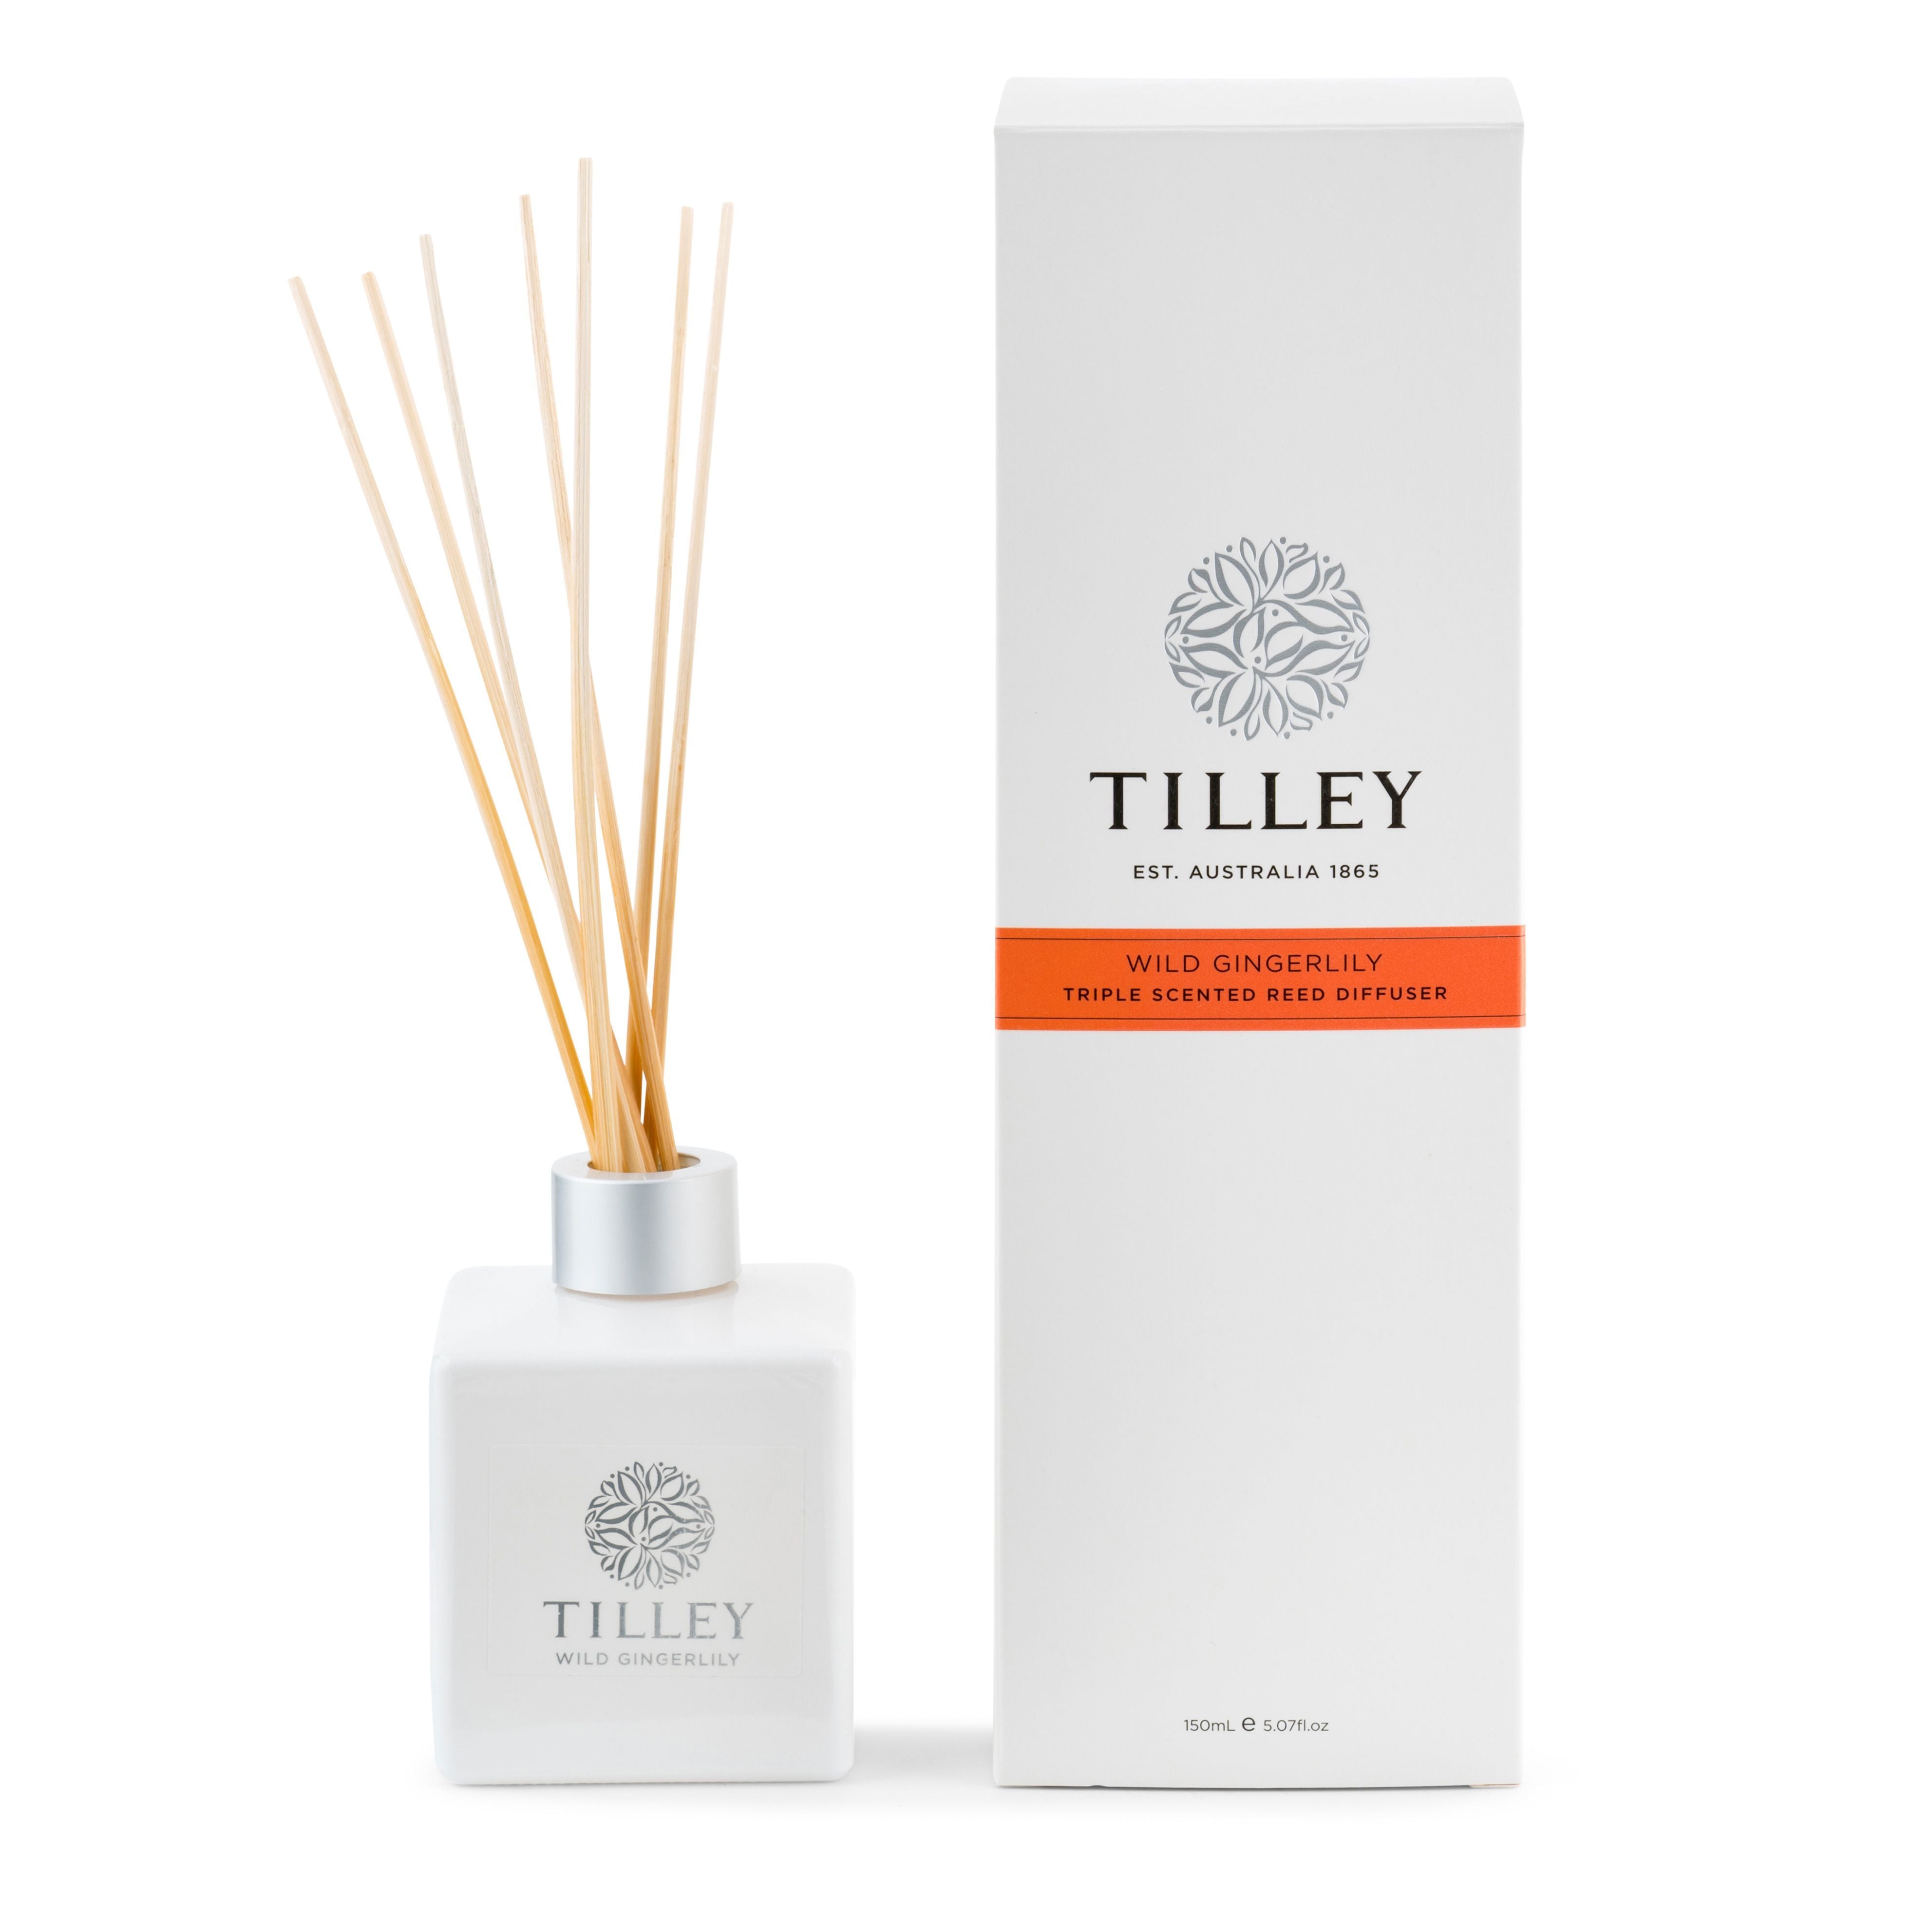 Aromatic Reed Diffuser 150mL - Asst Fragrance-Candles & Fragrance-Tilley-Wild Gingerlily-The Bay Room